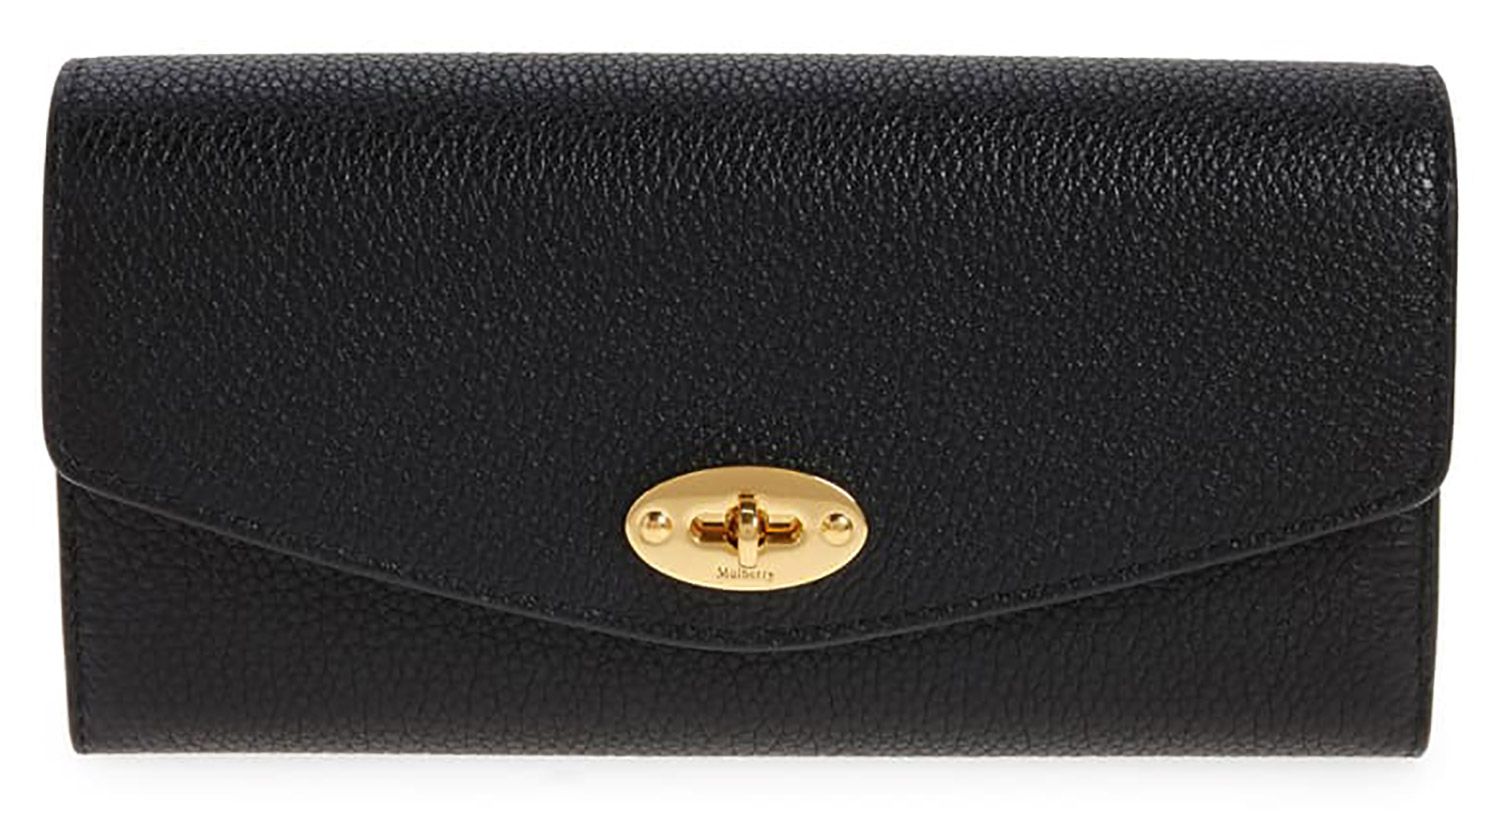 Mulberry Darley Continental Leather Wallet